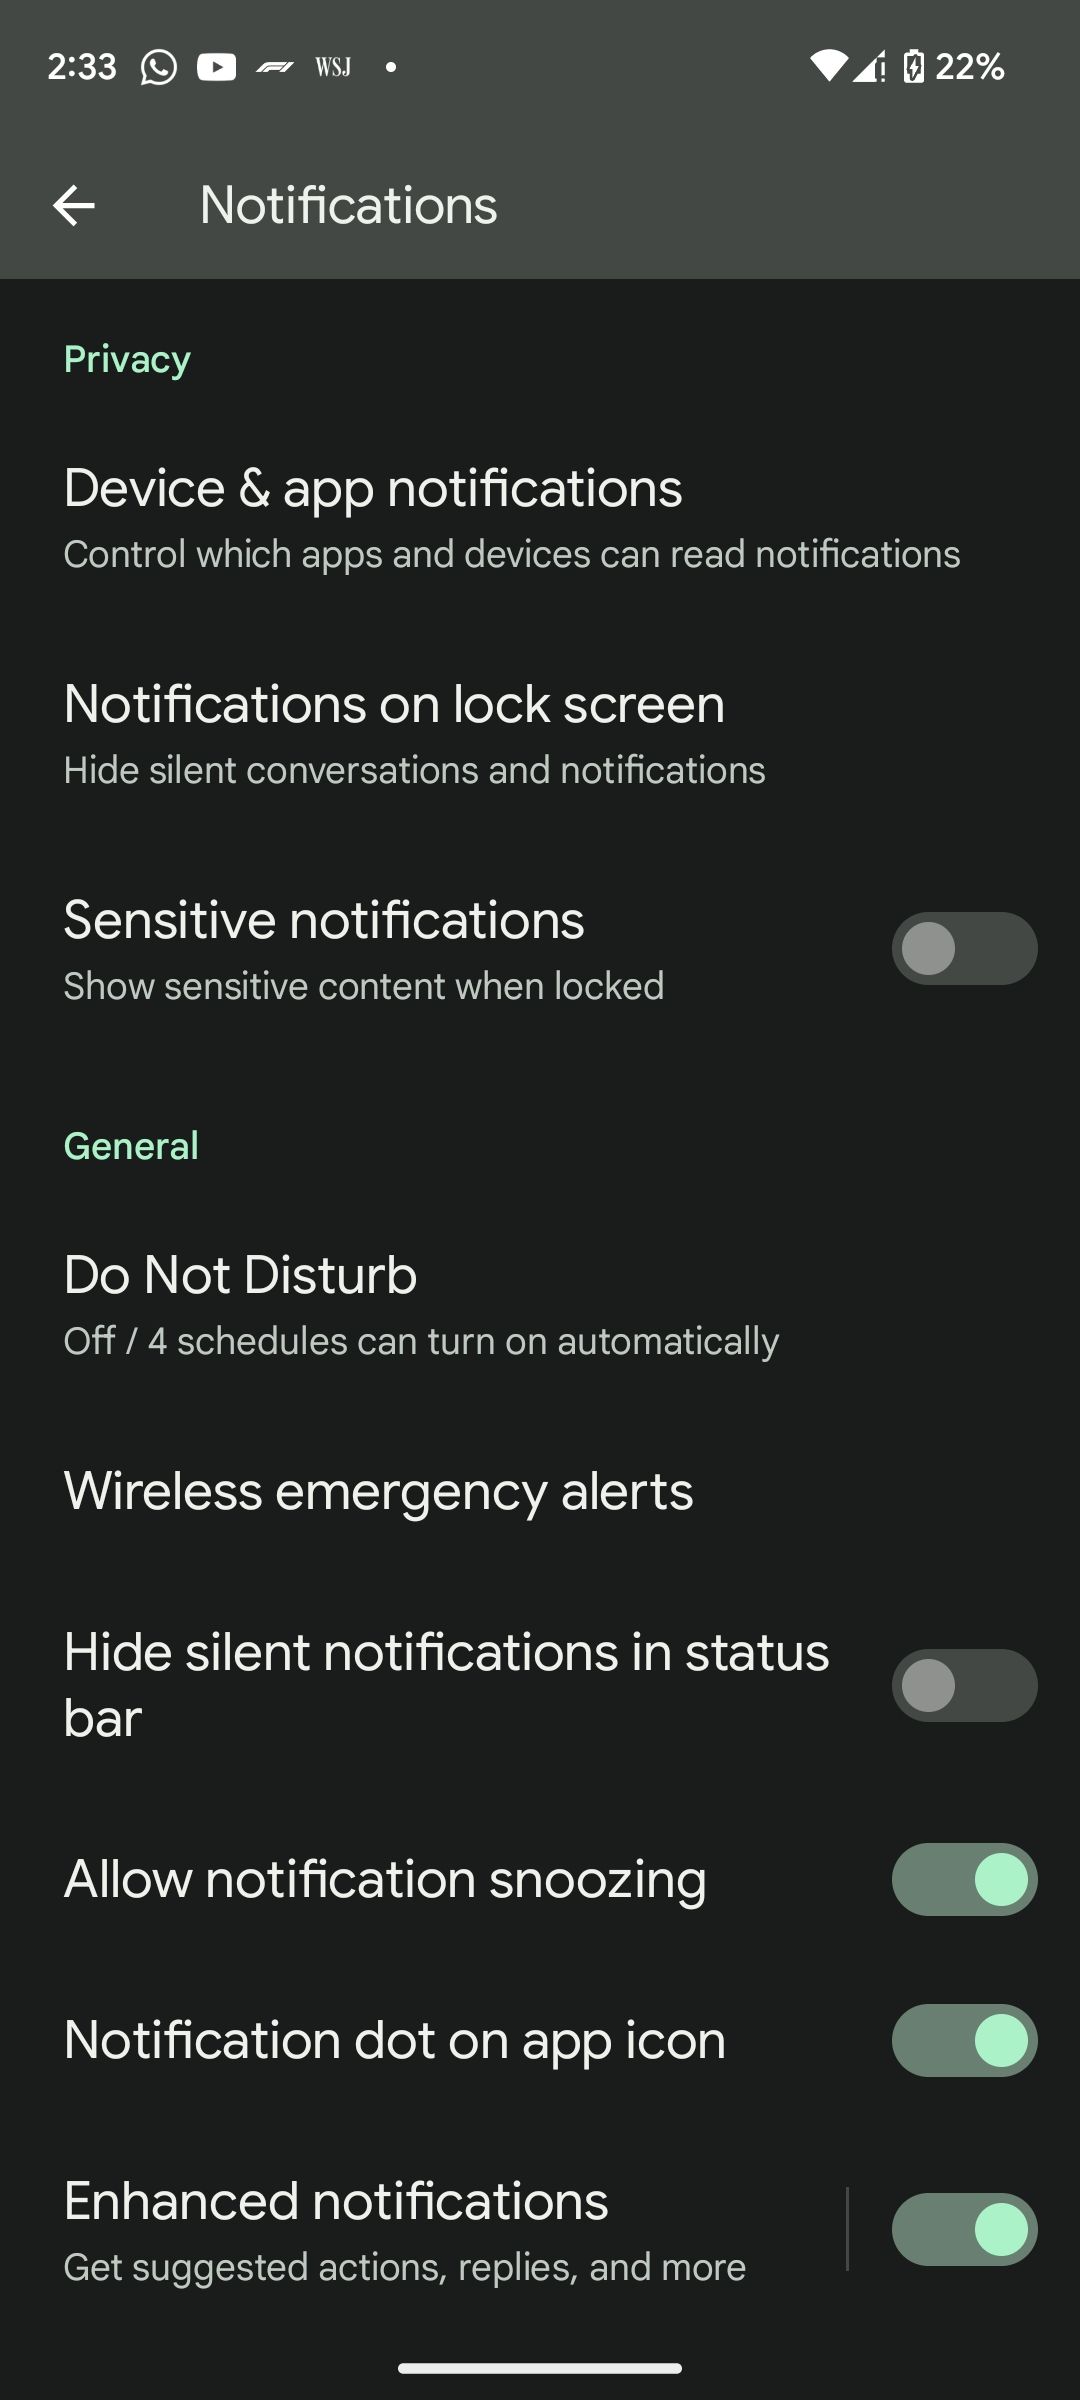 Notification snoozing enabled on Android